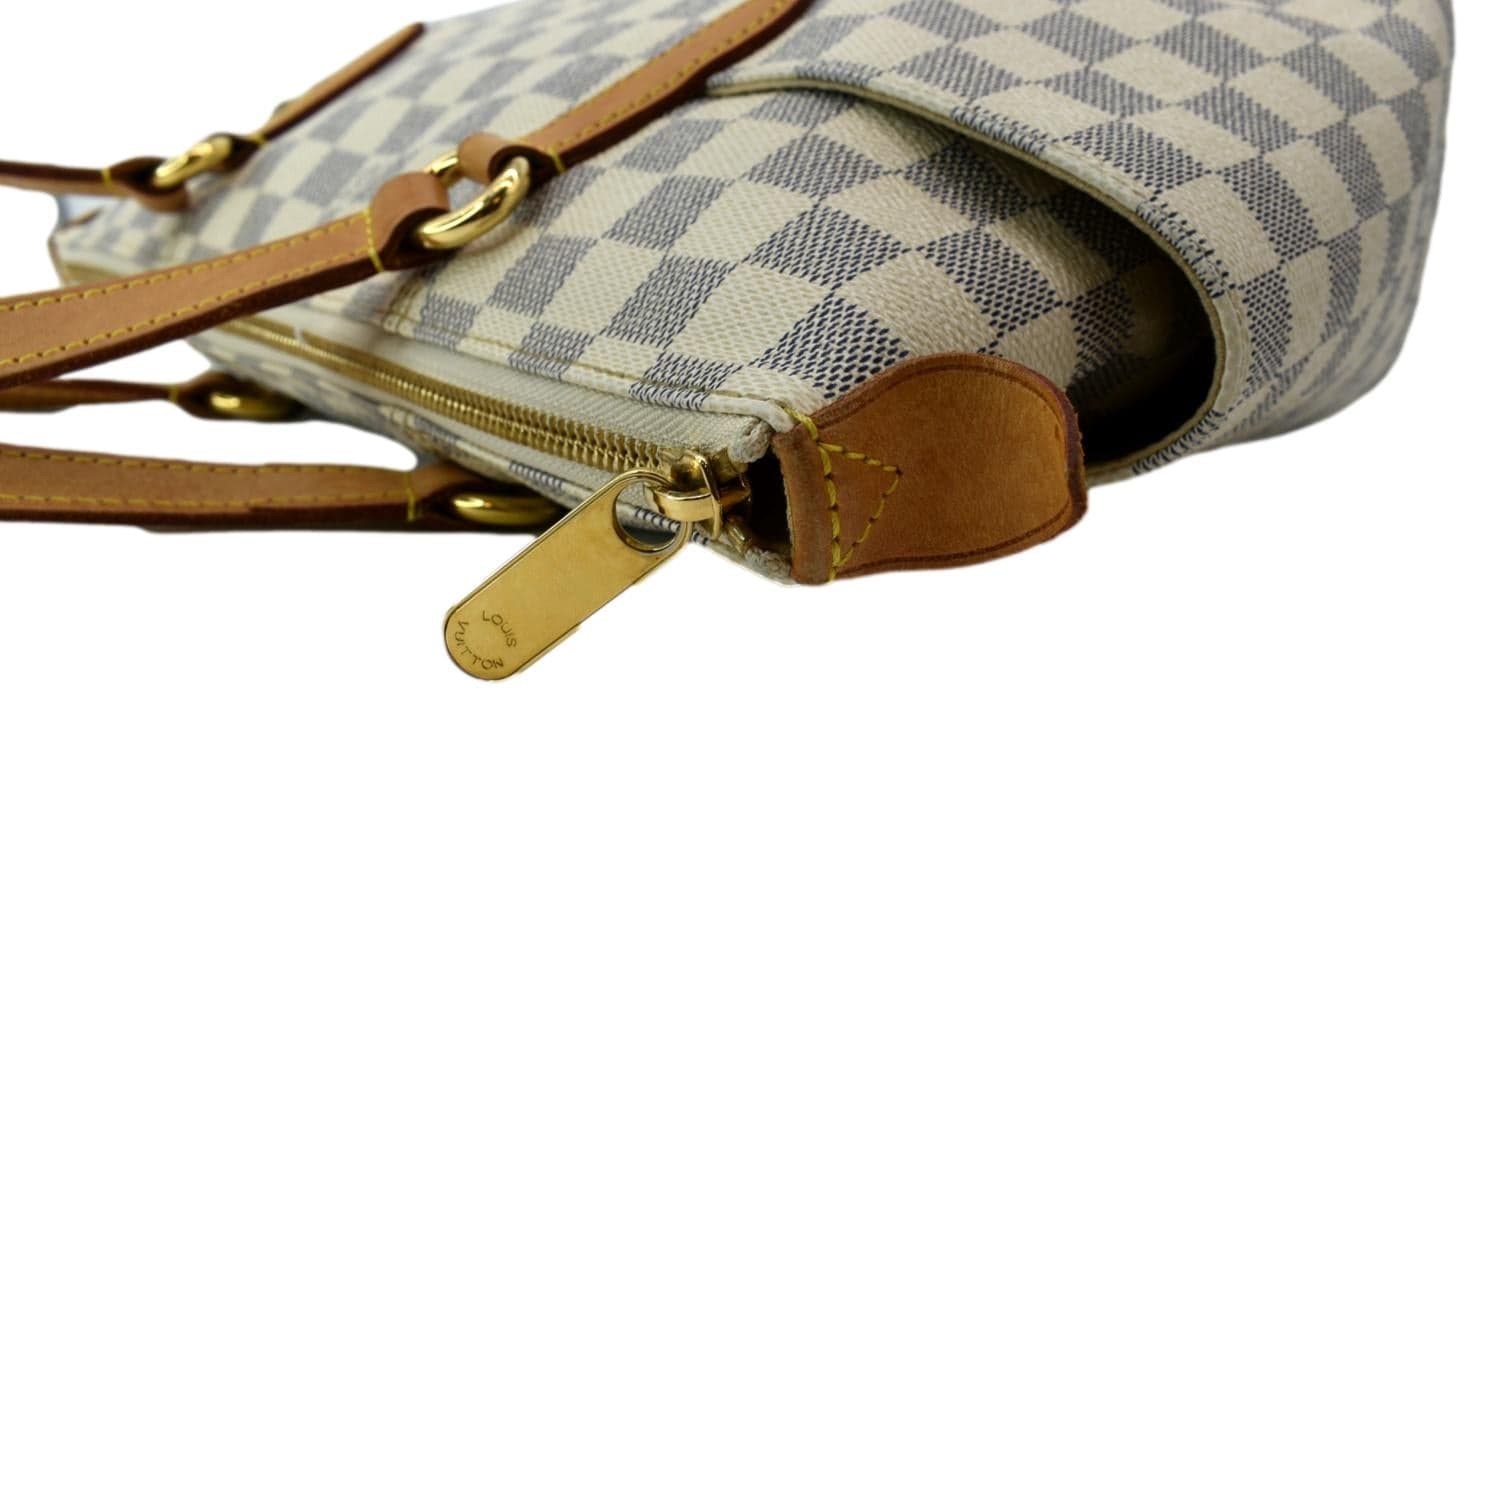 Louis Vuitton Damier Azur Totally PM Bag (Pre Owned) - Totally PM, Beige, 1  Payment